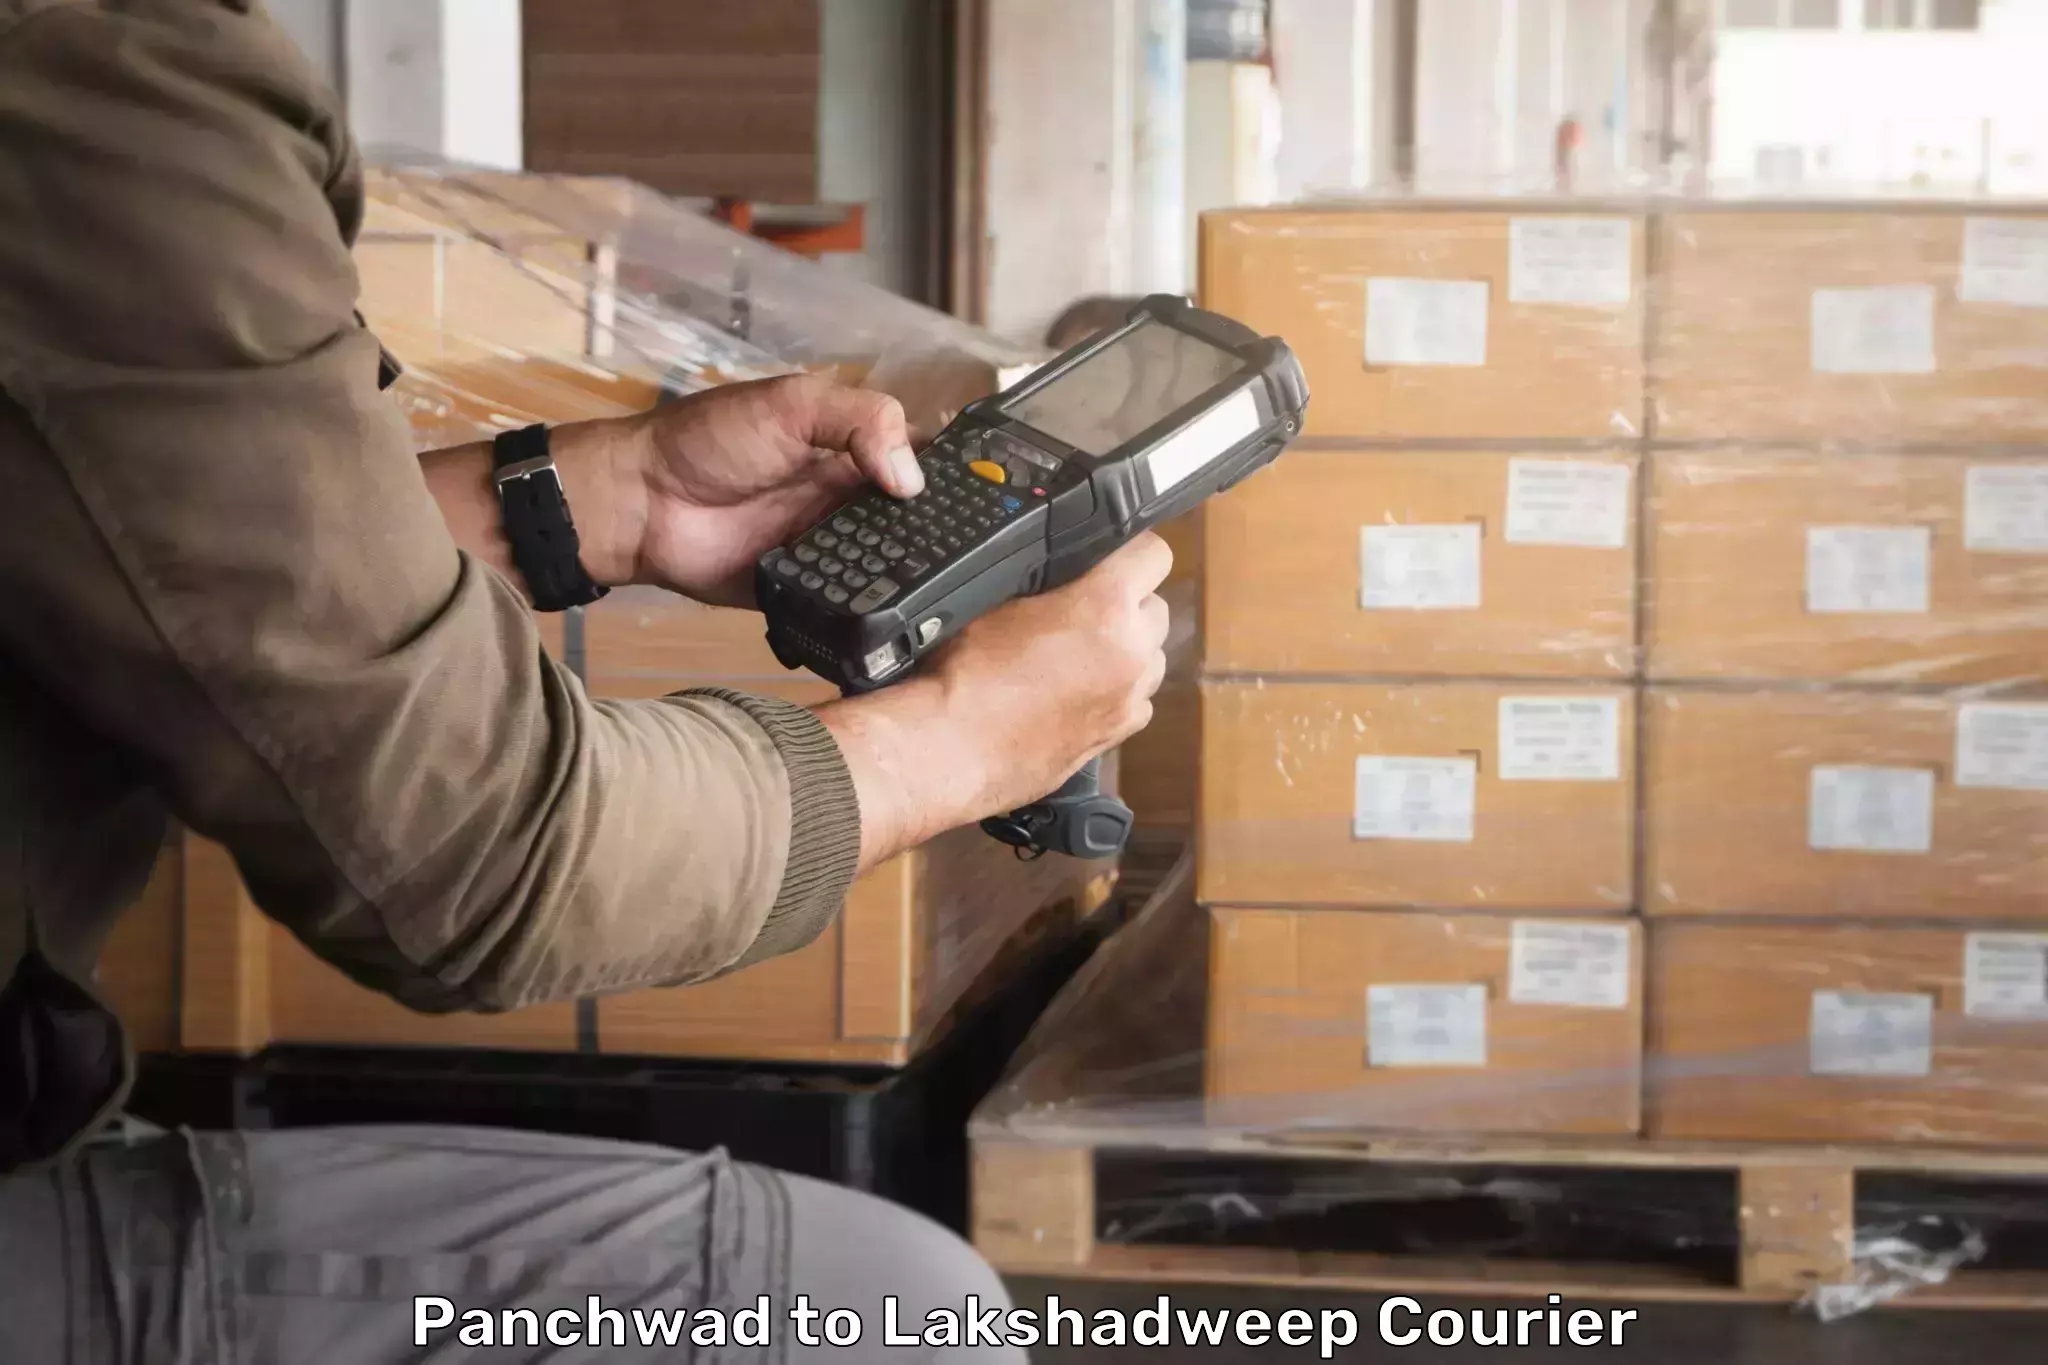 Bulk courier orders Panchwad to Lakshadweep